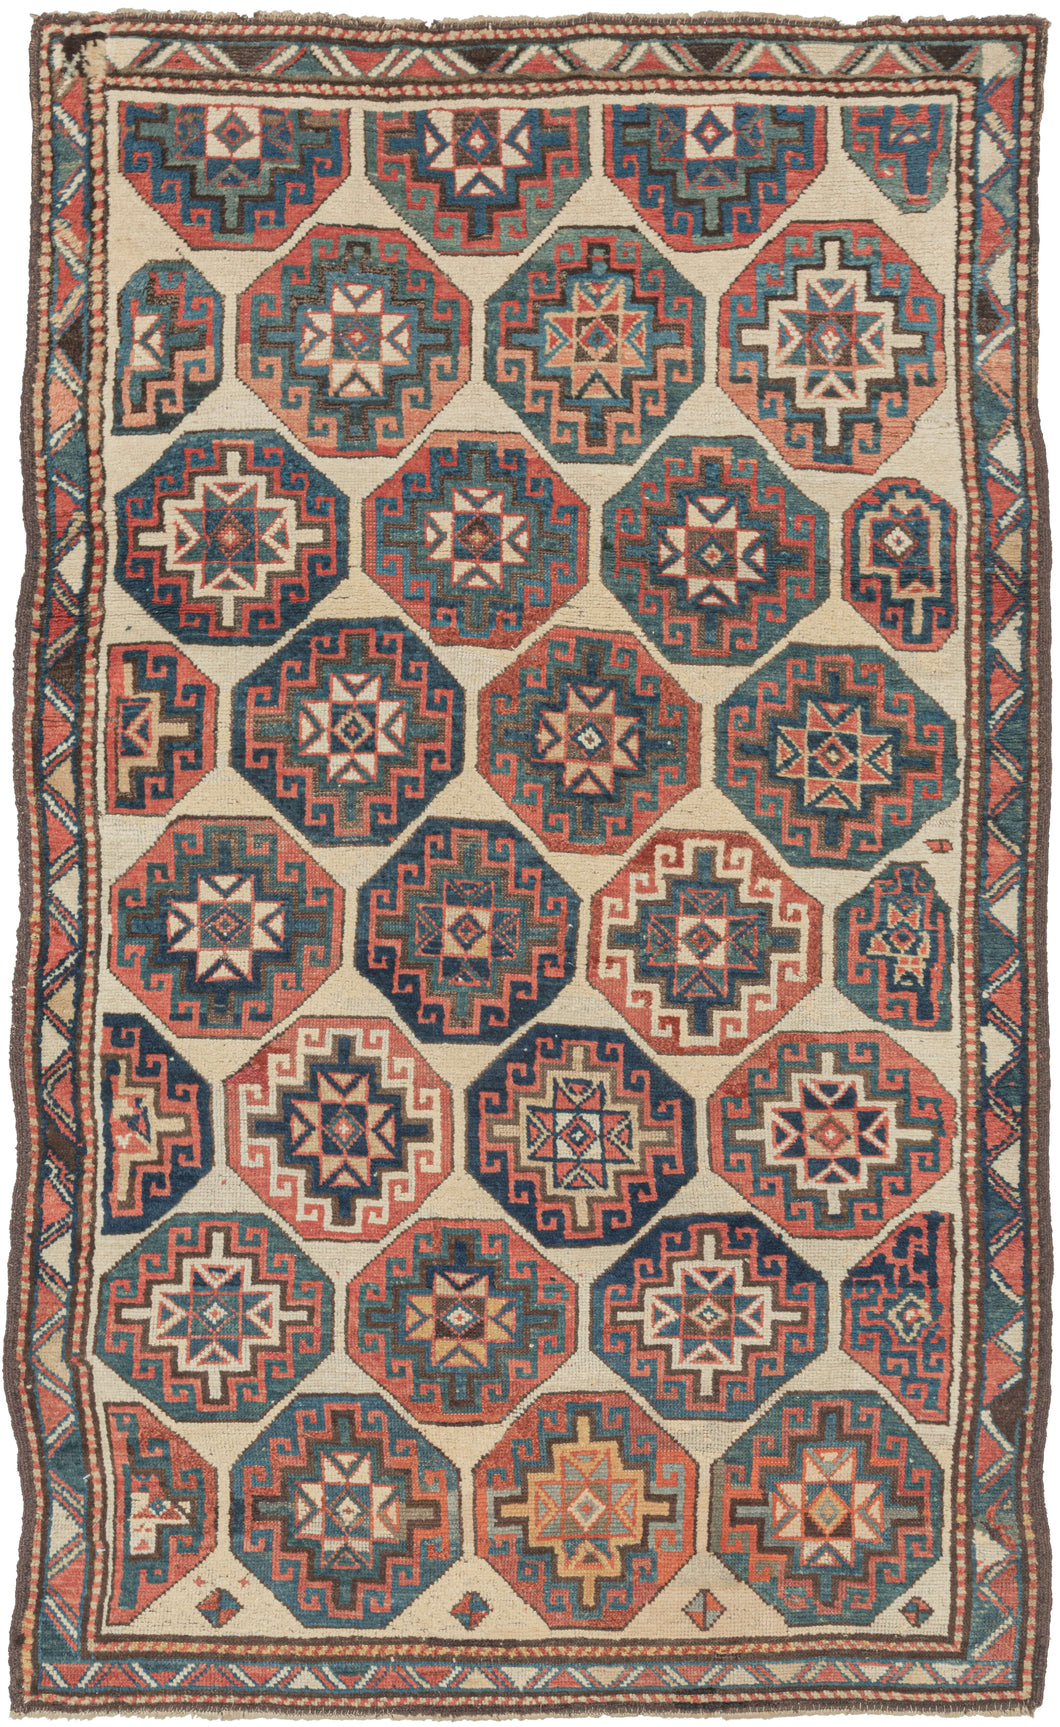 Antique Caucasian Kazak rug featuring offset Memling guls in primary colors of red, blue, and yellow on a soothing ivory ground and framed by an interlocking sawtooth border. Some guls become distorted as these reach the edges. Gentle abrash, wonderful spacing, a pleasing palette, and just enough wonkiness make this a very satisfying piece. 